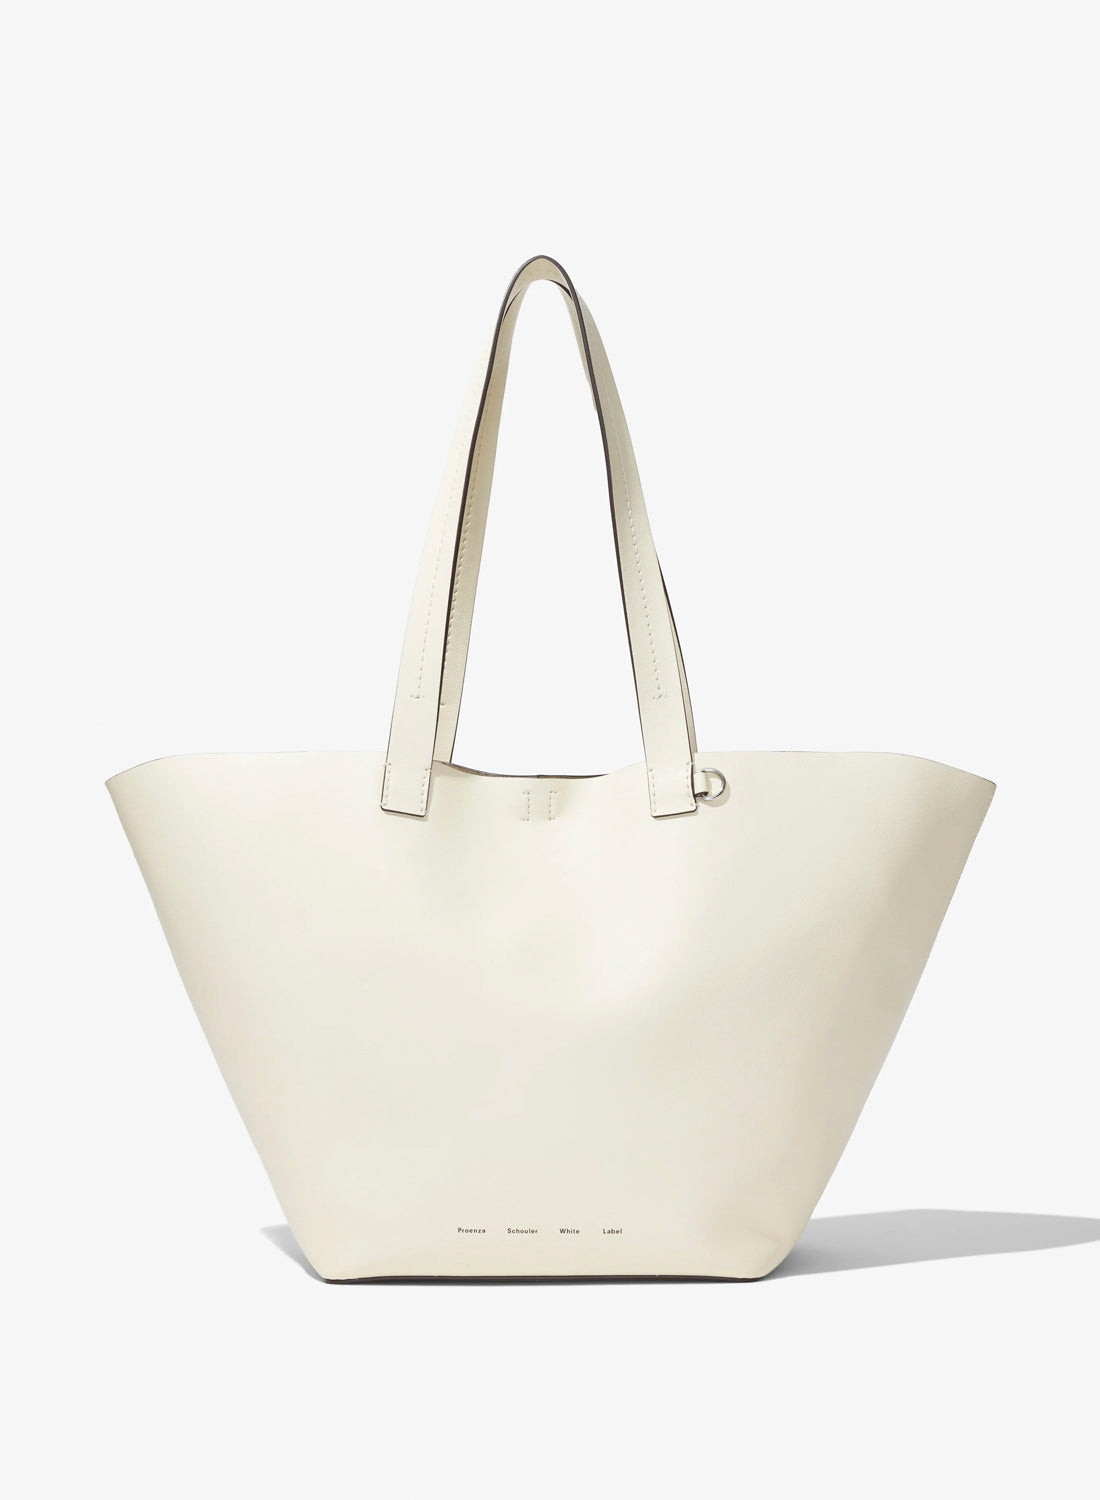 Proenza Schouler White Label Large Bedford Tote in Leather Off White